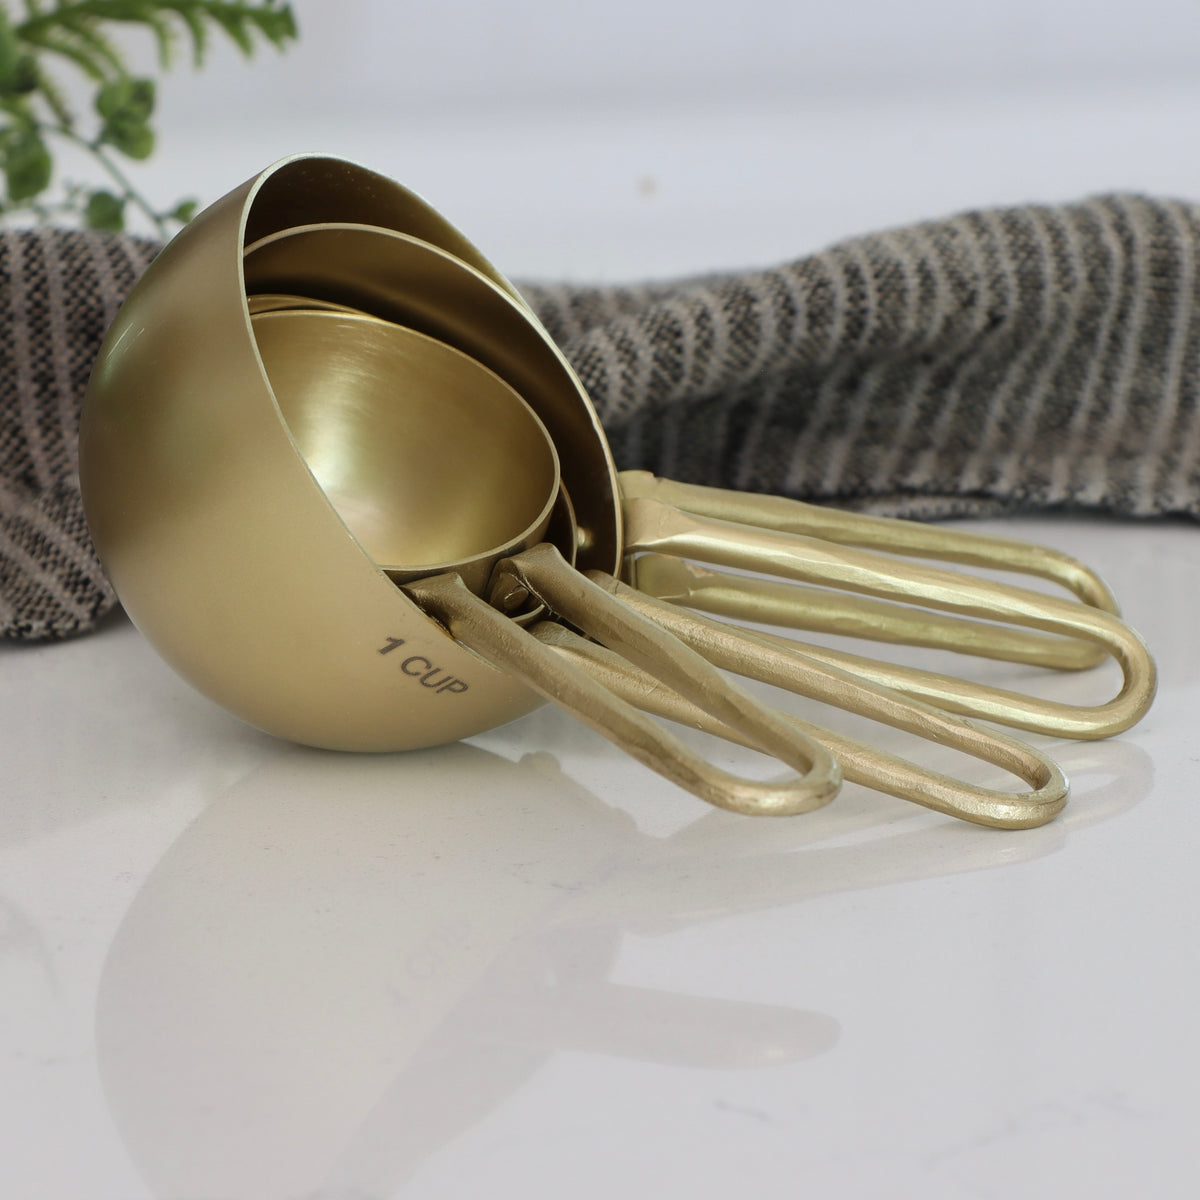 Forged Brass Measuring Scoops - Set of 4 - Holistic Habitat 